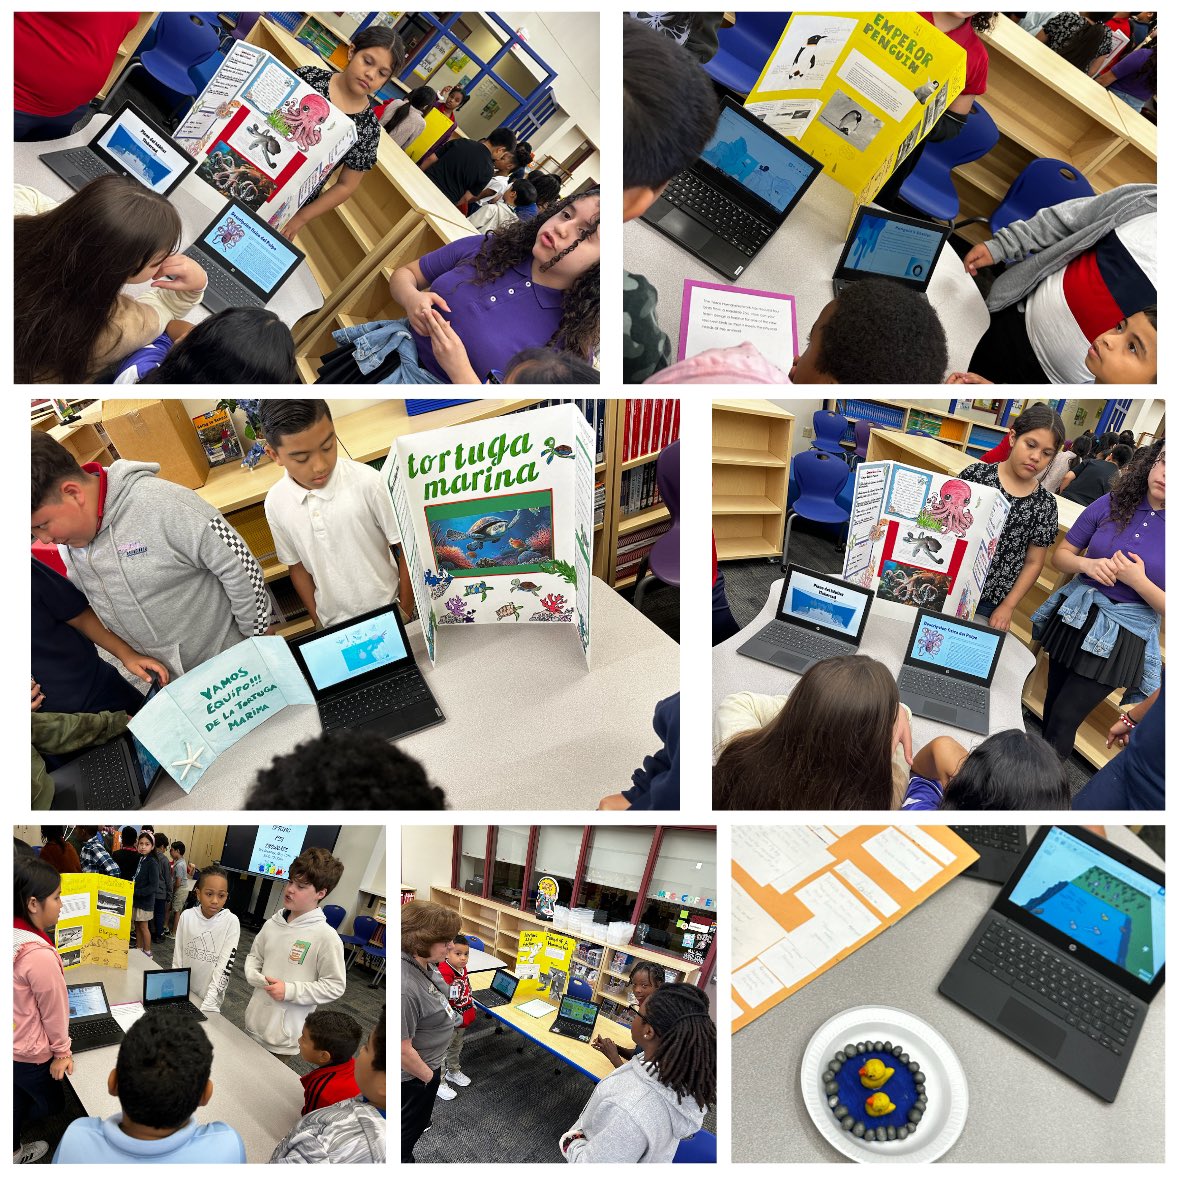 4th grade adventurers ⭐️ROCKED ⭐️ their spring PBL showcase using @tinkercad 🎉 #STEMtastic job!